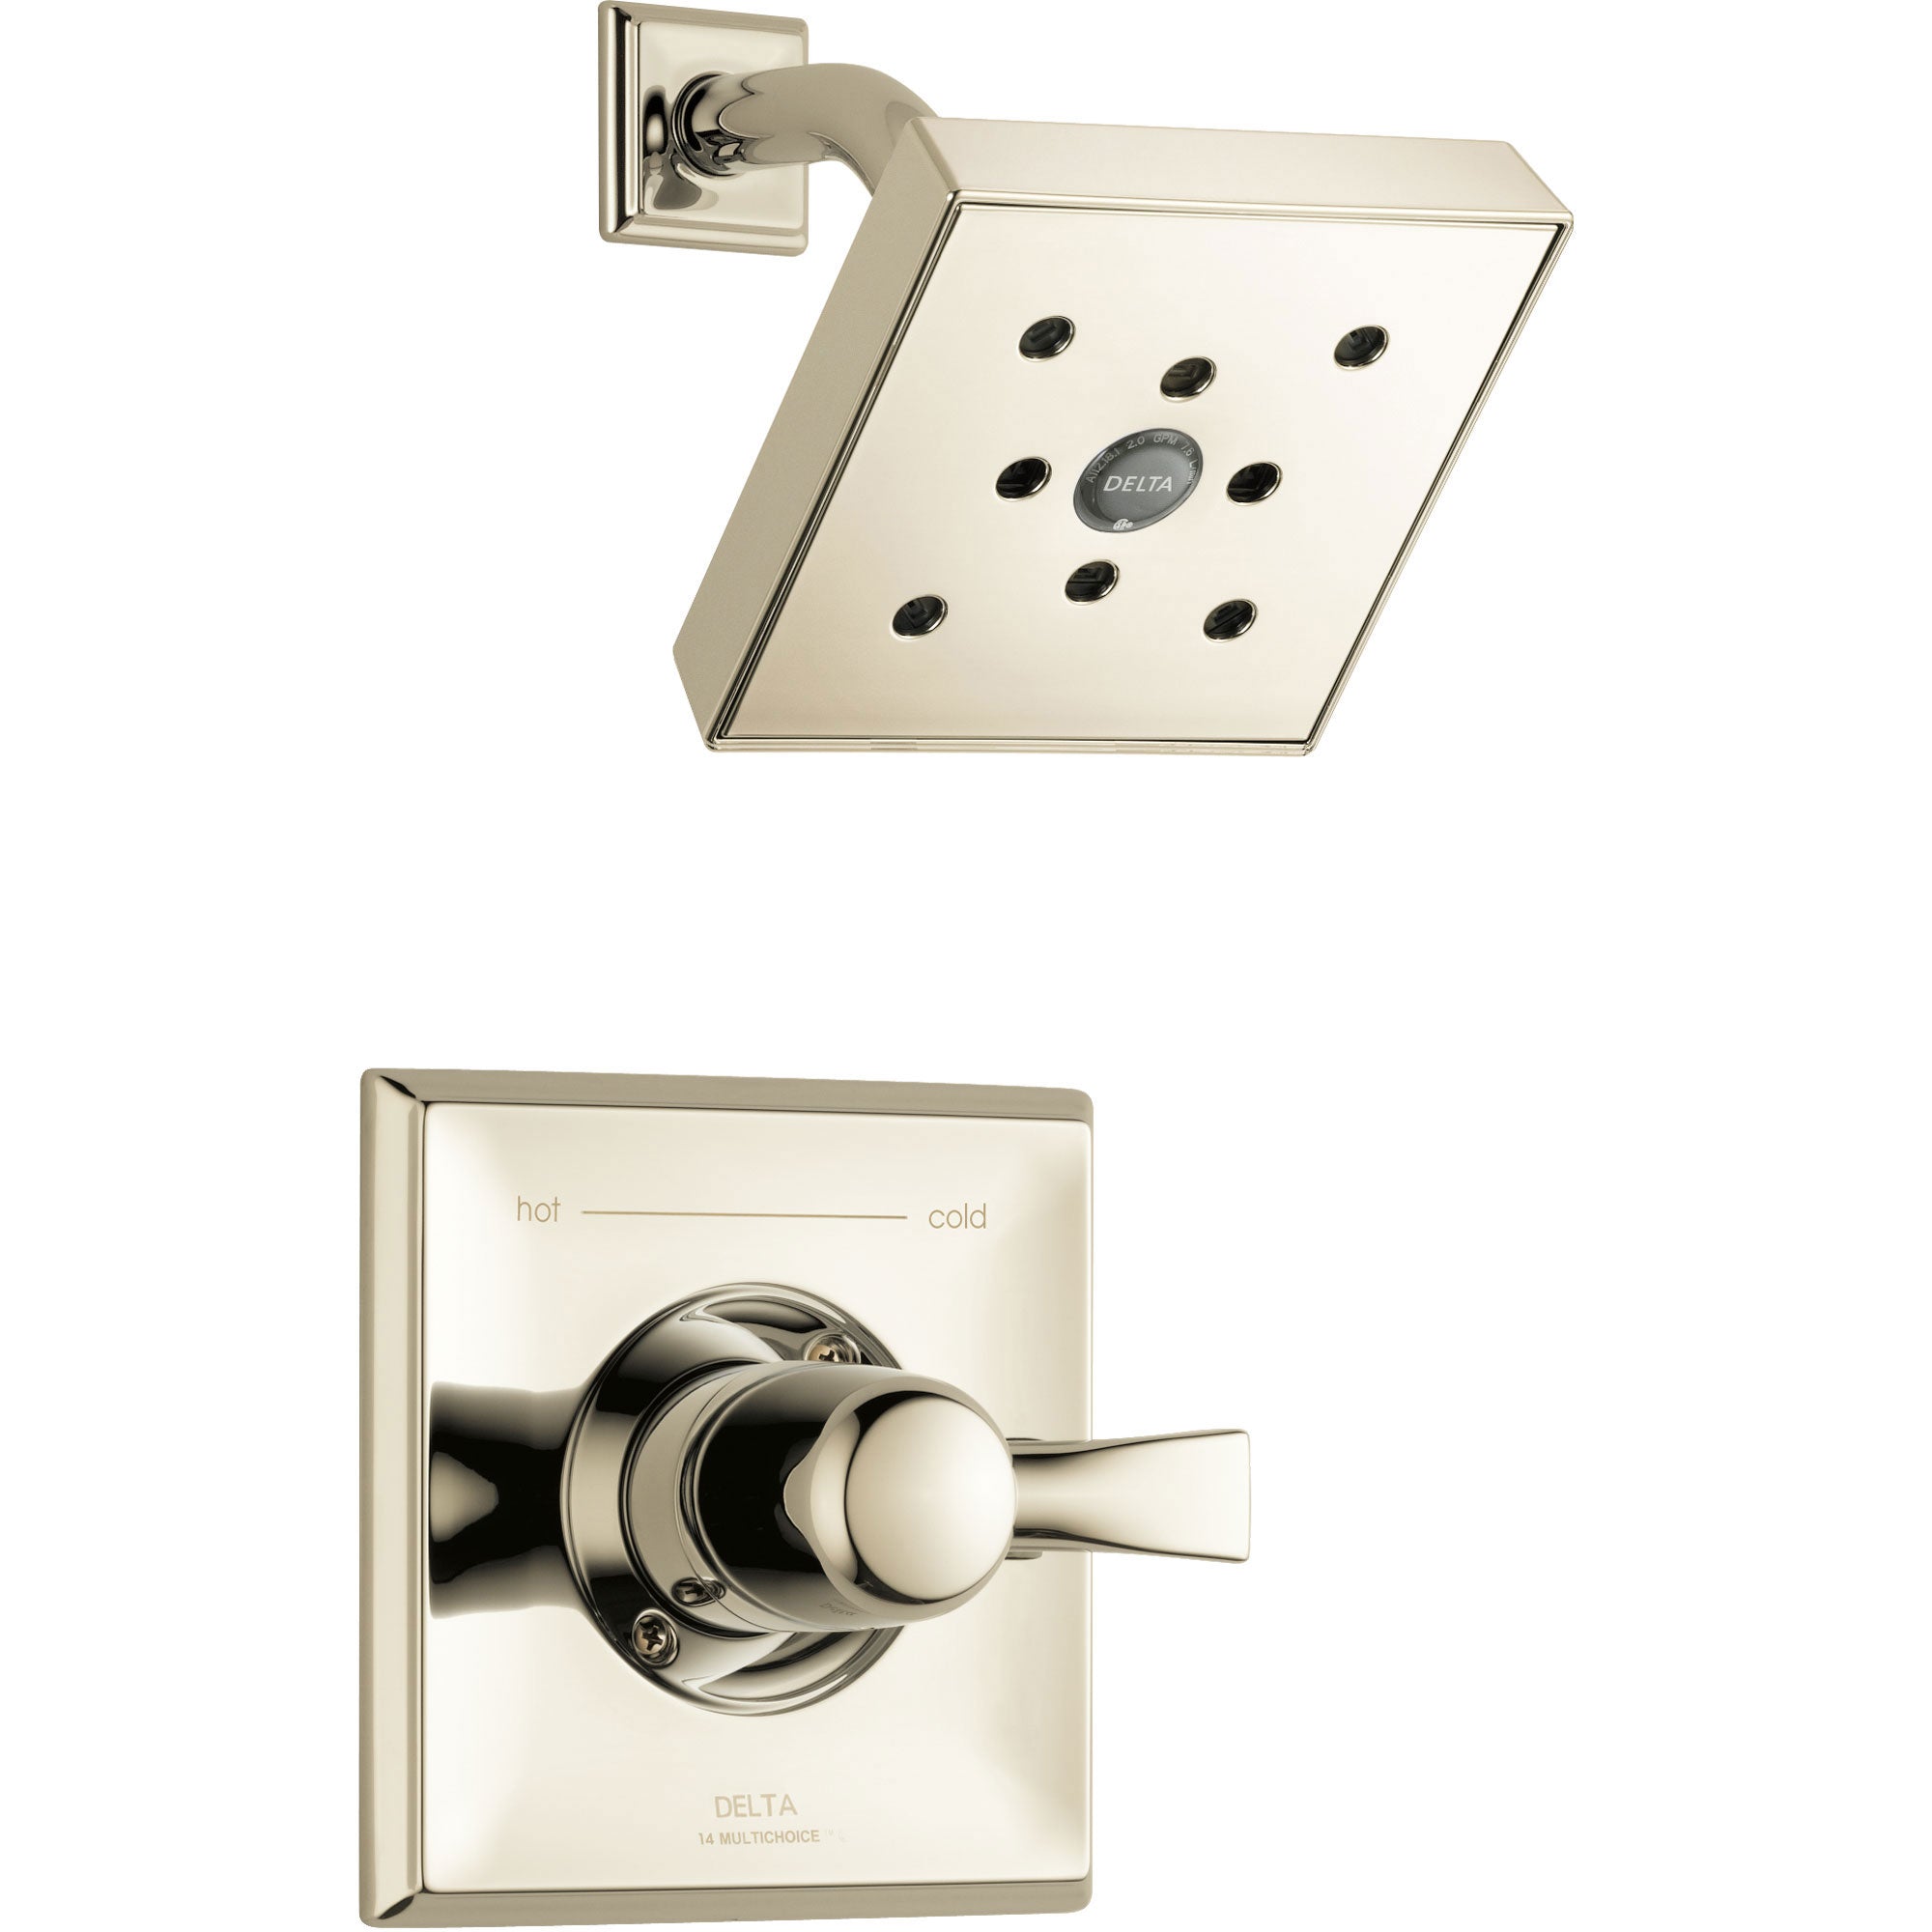 Delta Dryden Modern Square 14 Series H2Okinetic Polished Nickel Finish Single Handle Shower Only Faucet INCLUDES Rough-in Valve with Stops D1213V